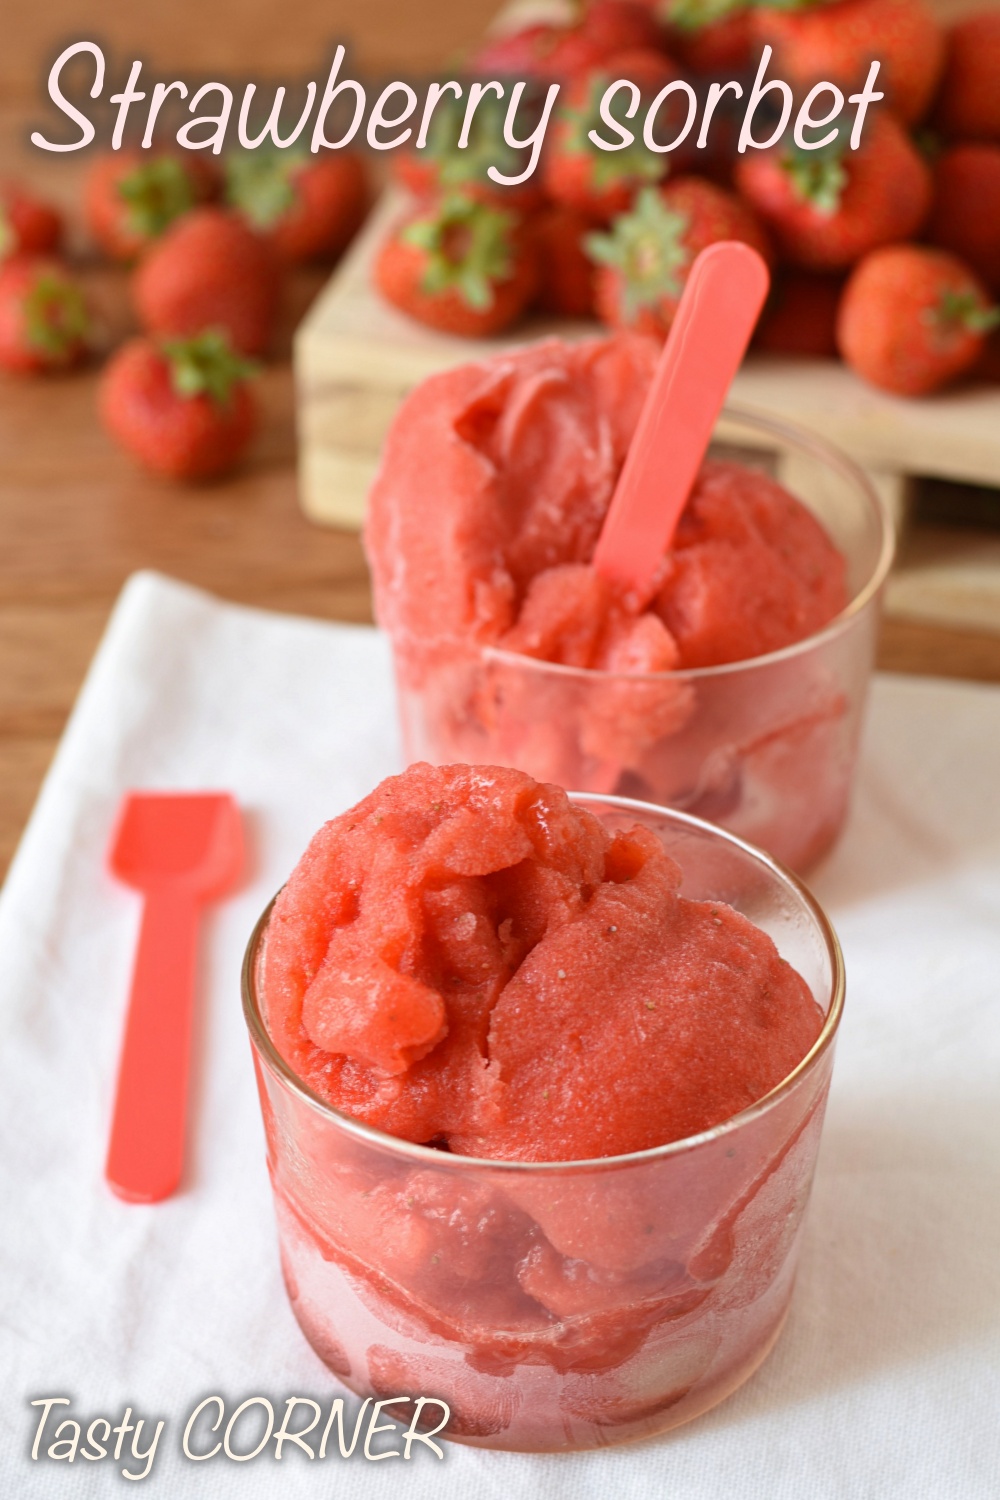 En_V_-homemade-strawberry-sorbet-3-ingredients-easy-italian-recipe-with-or-without-ice-cream-maker-by-tasty-corner-blog